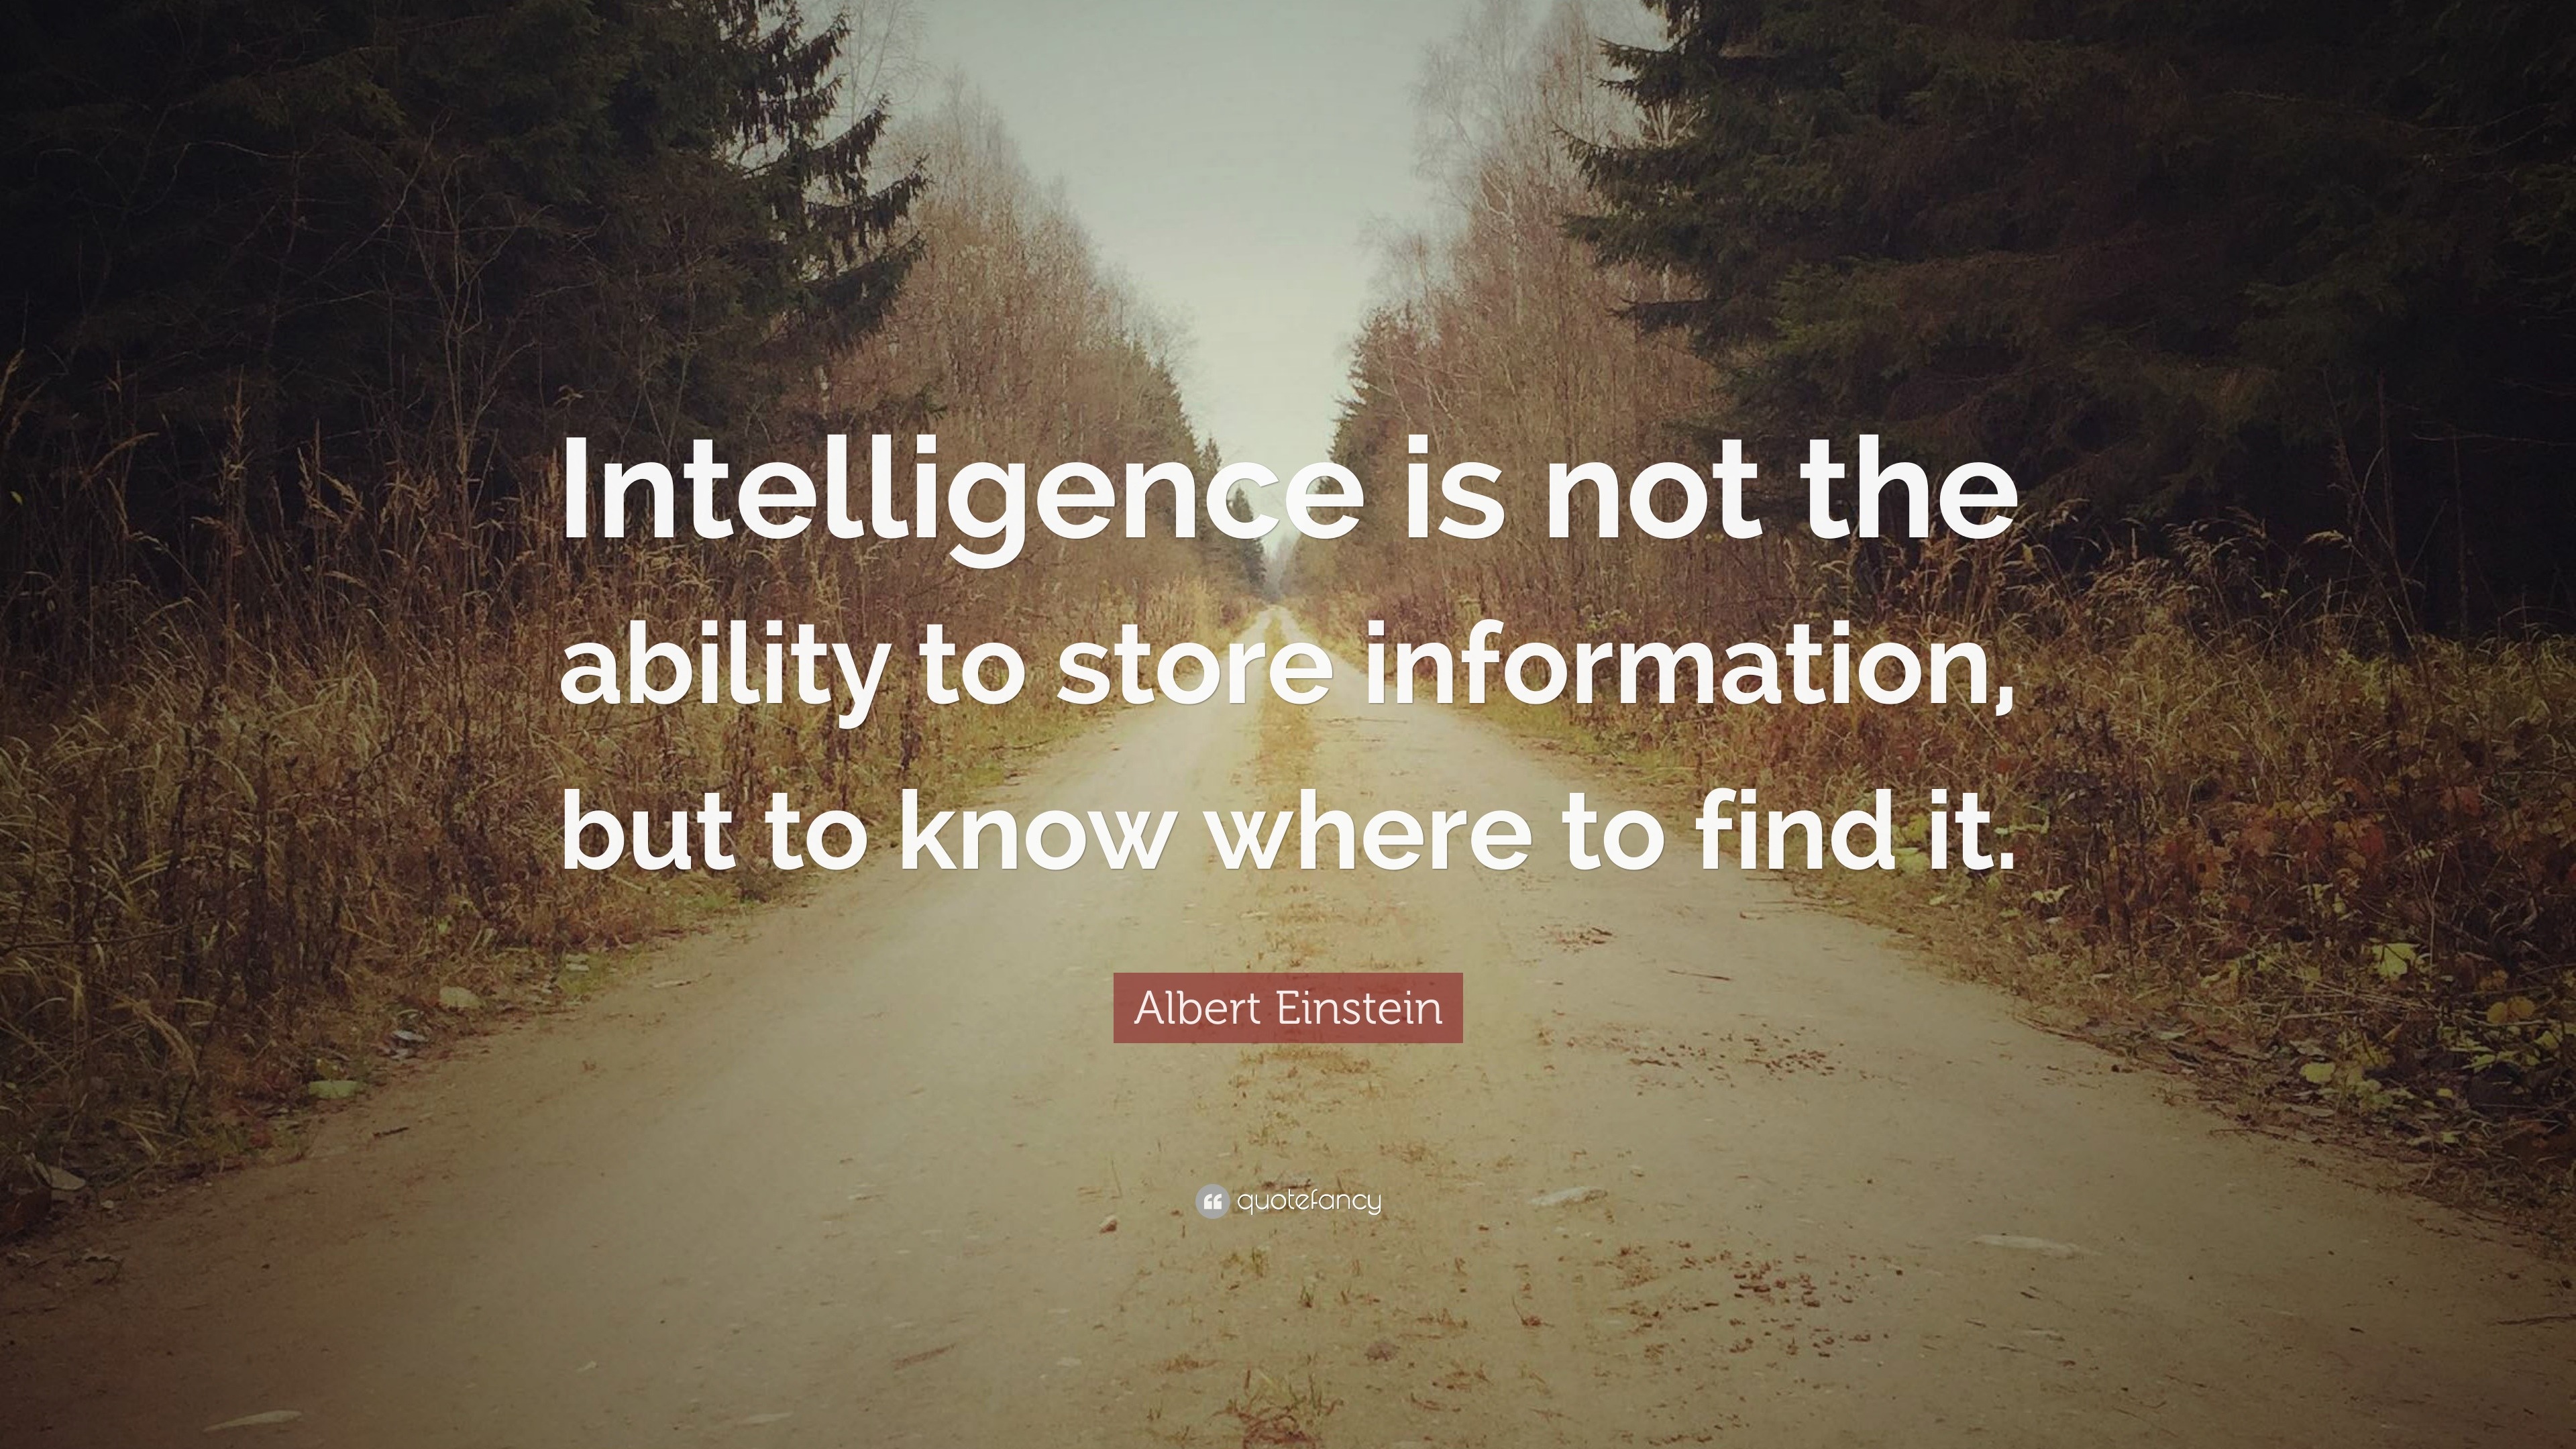 Albert Einstein Quote: “Intelligence is not the ability to store